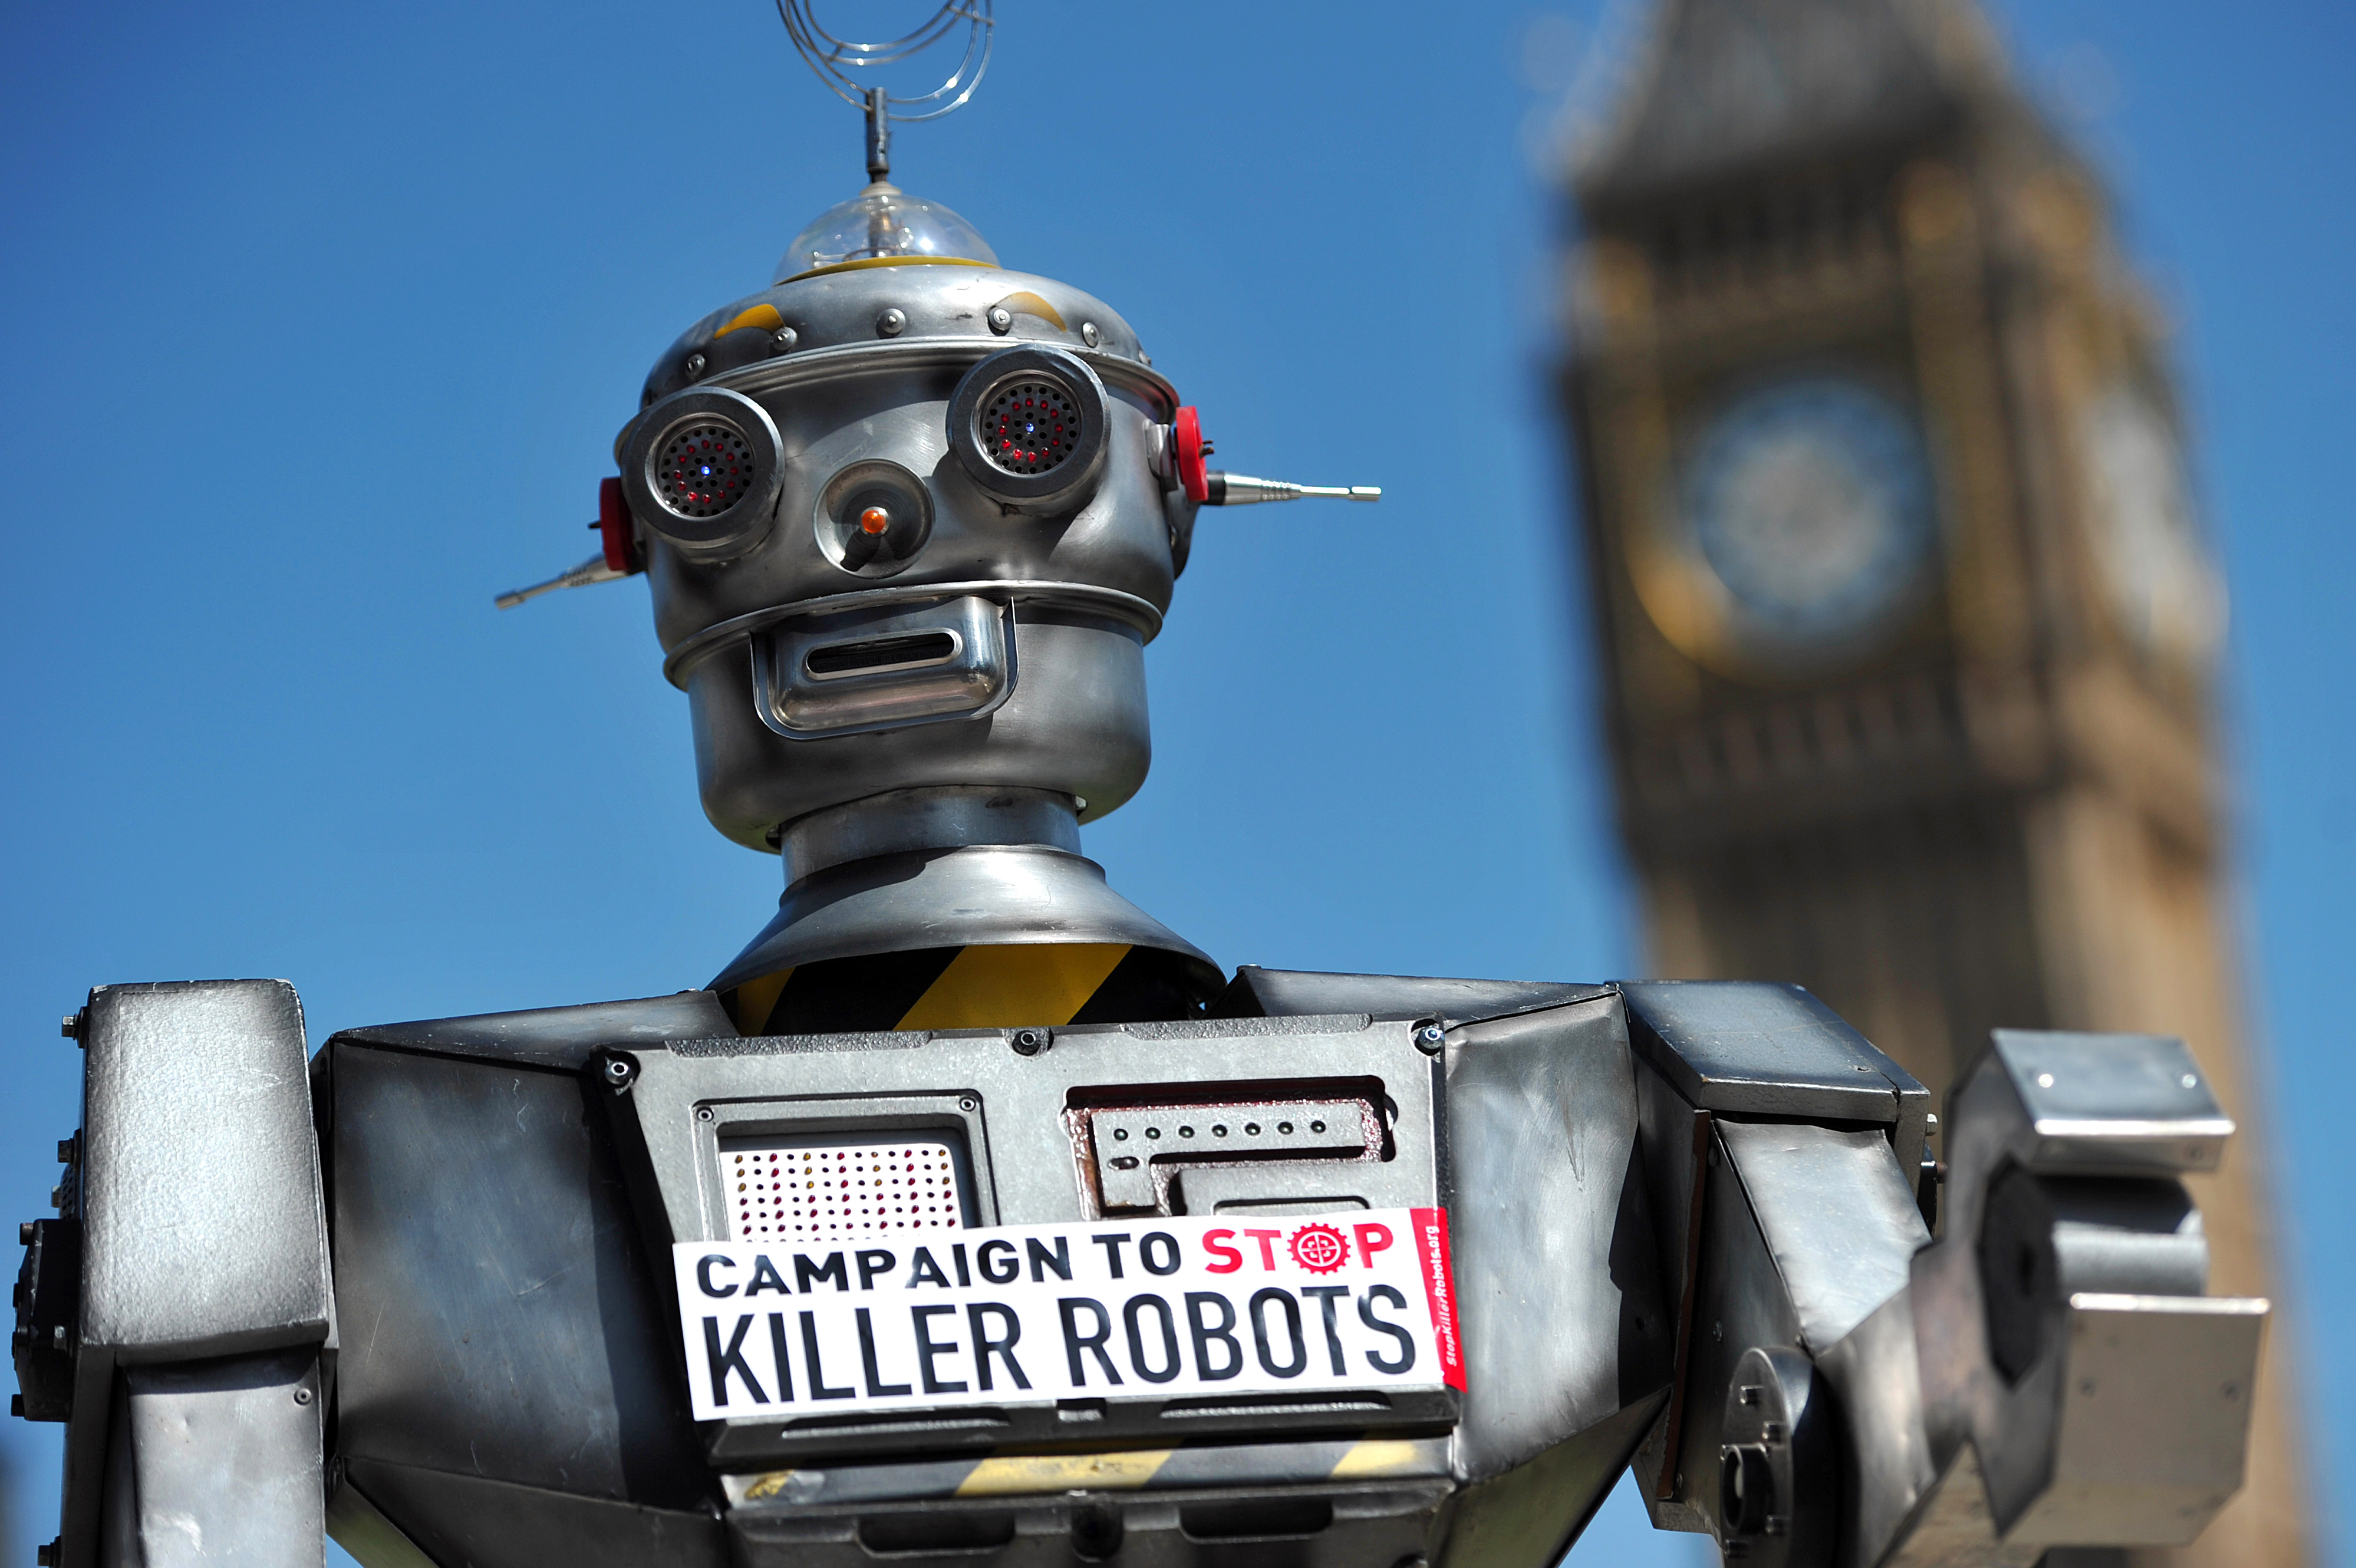 A mock "killer robot" is pictured in central London